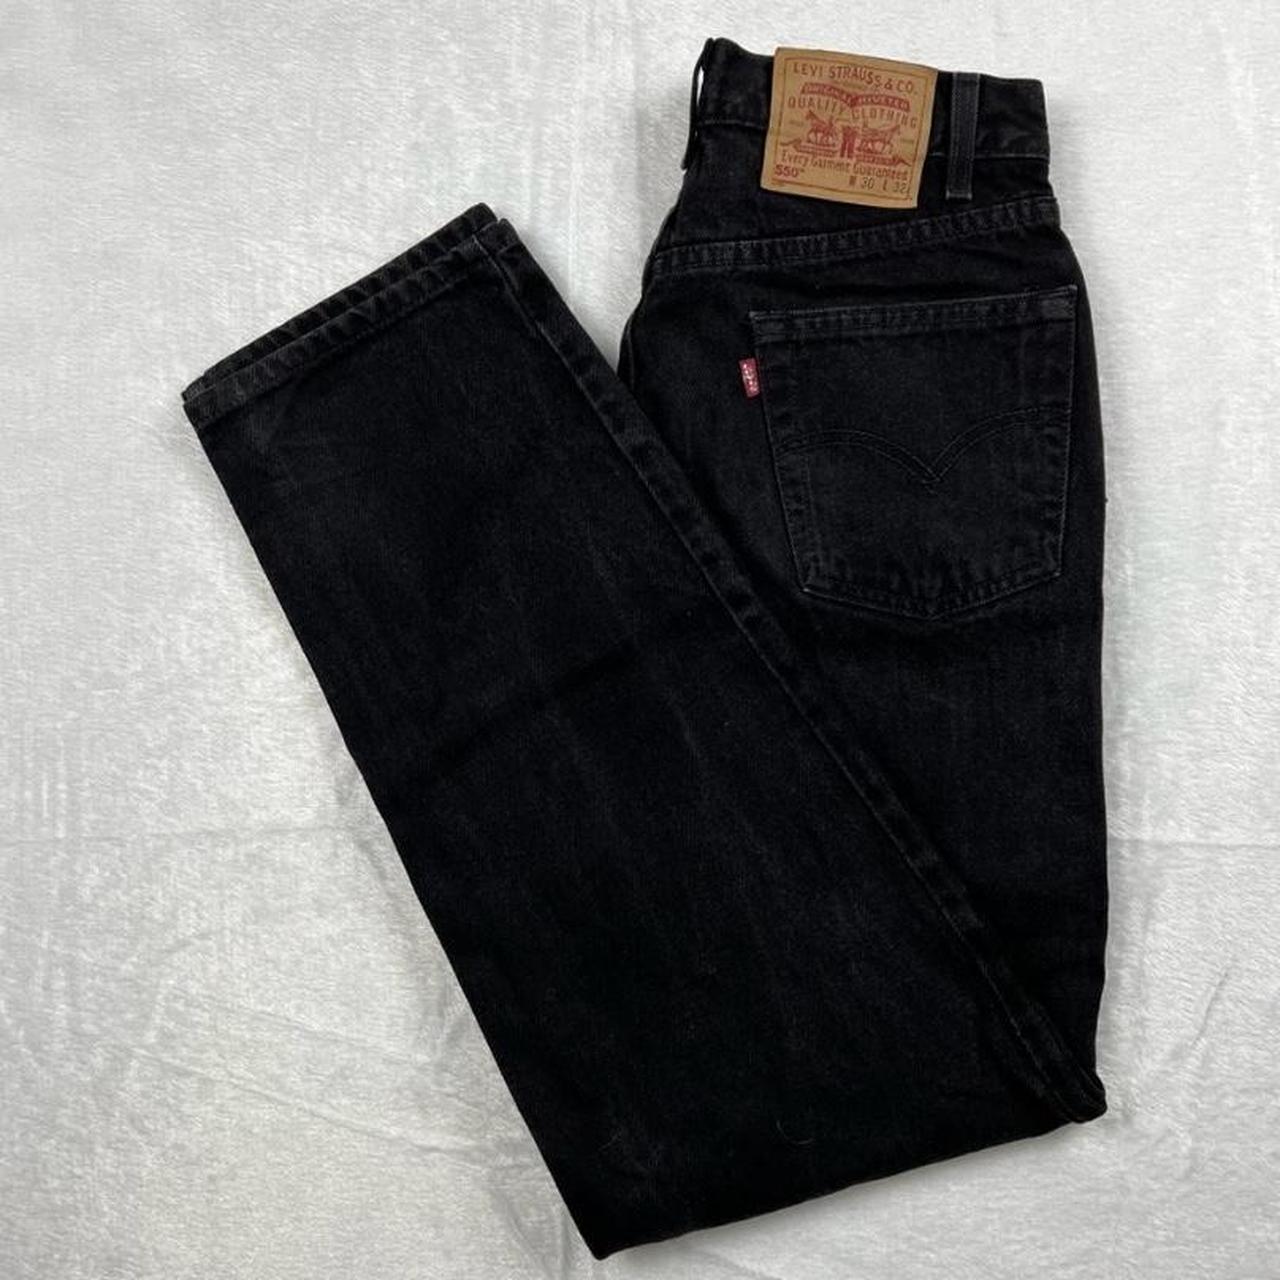 Levi’s 550 Black Relaxed Fit Jeans 30x32 Bought... - Depop